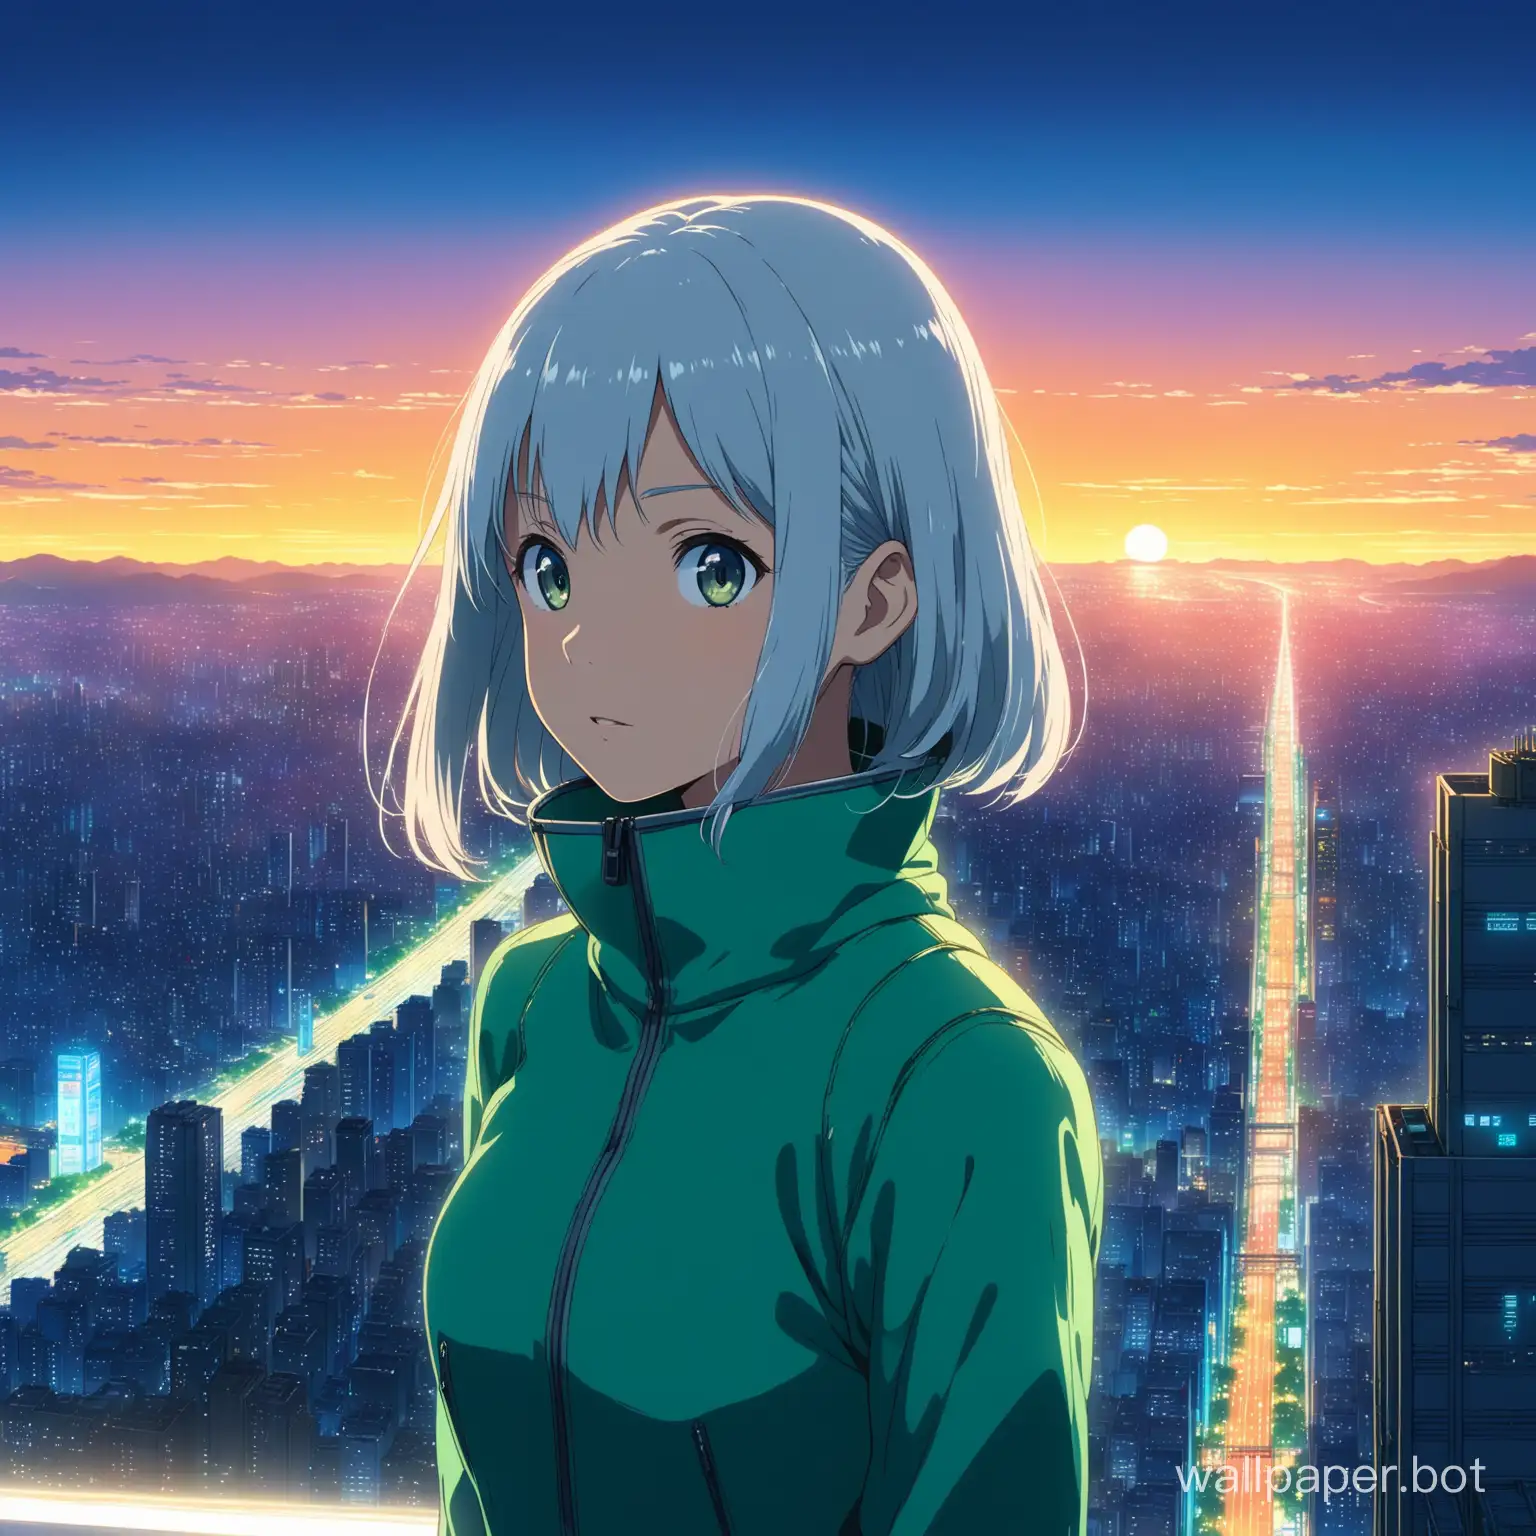 portrait of a mysterious anime girl with silver hair, in a sleek futuristic suit, atop a neon-lit skyscraper overlooking the city, neon lighting from billboards, high angle overlooking the cityscape, landscape illustration, anime key visual by Makoto Shinkai and Studio Ghibli, 32k UHD.